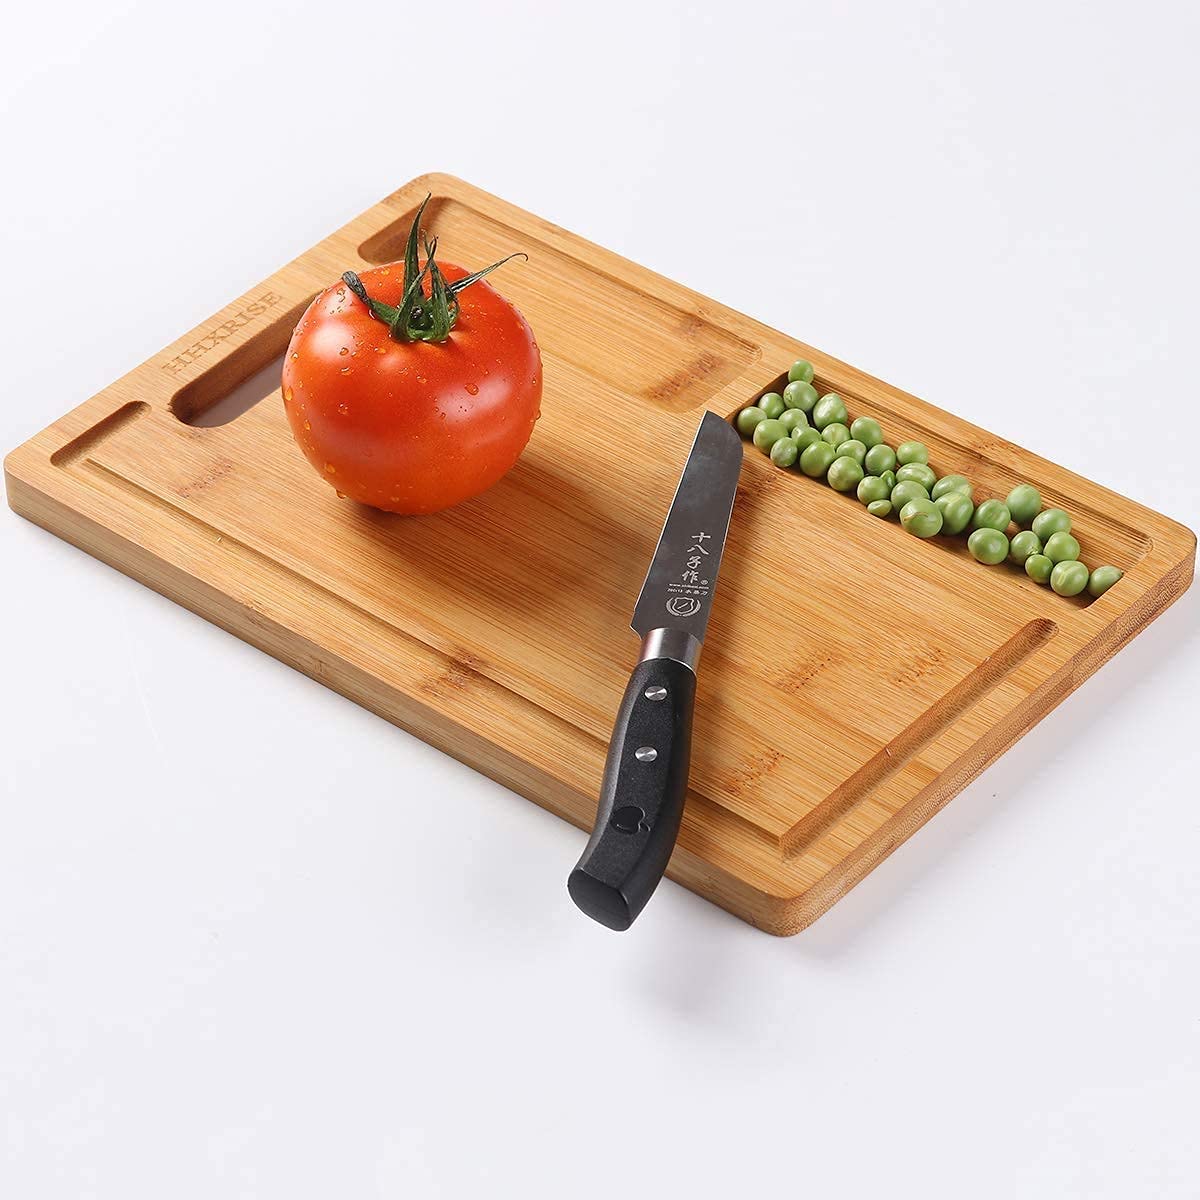 Need a Cutting Board Set for Your Kitchen. Consider The Pioneer Woman